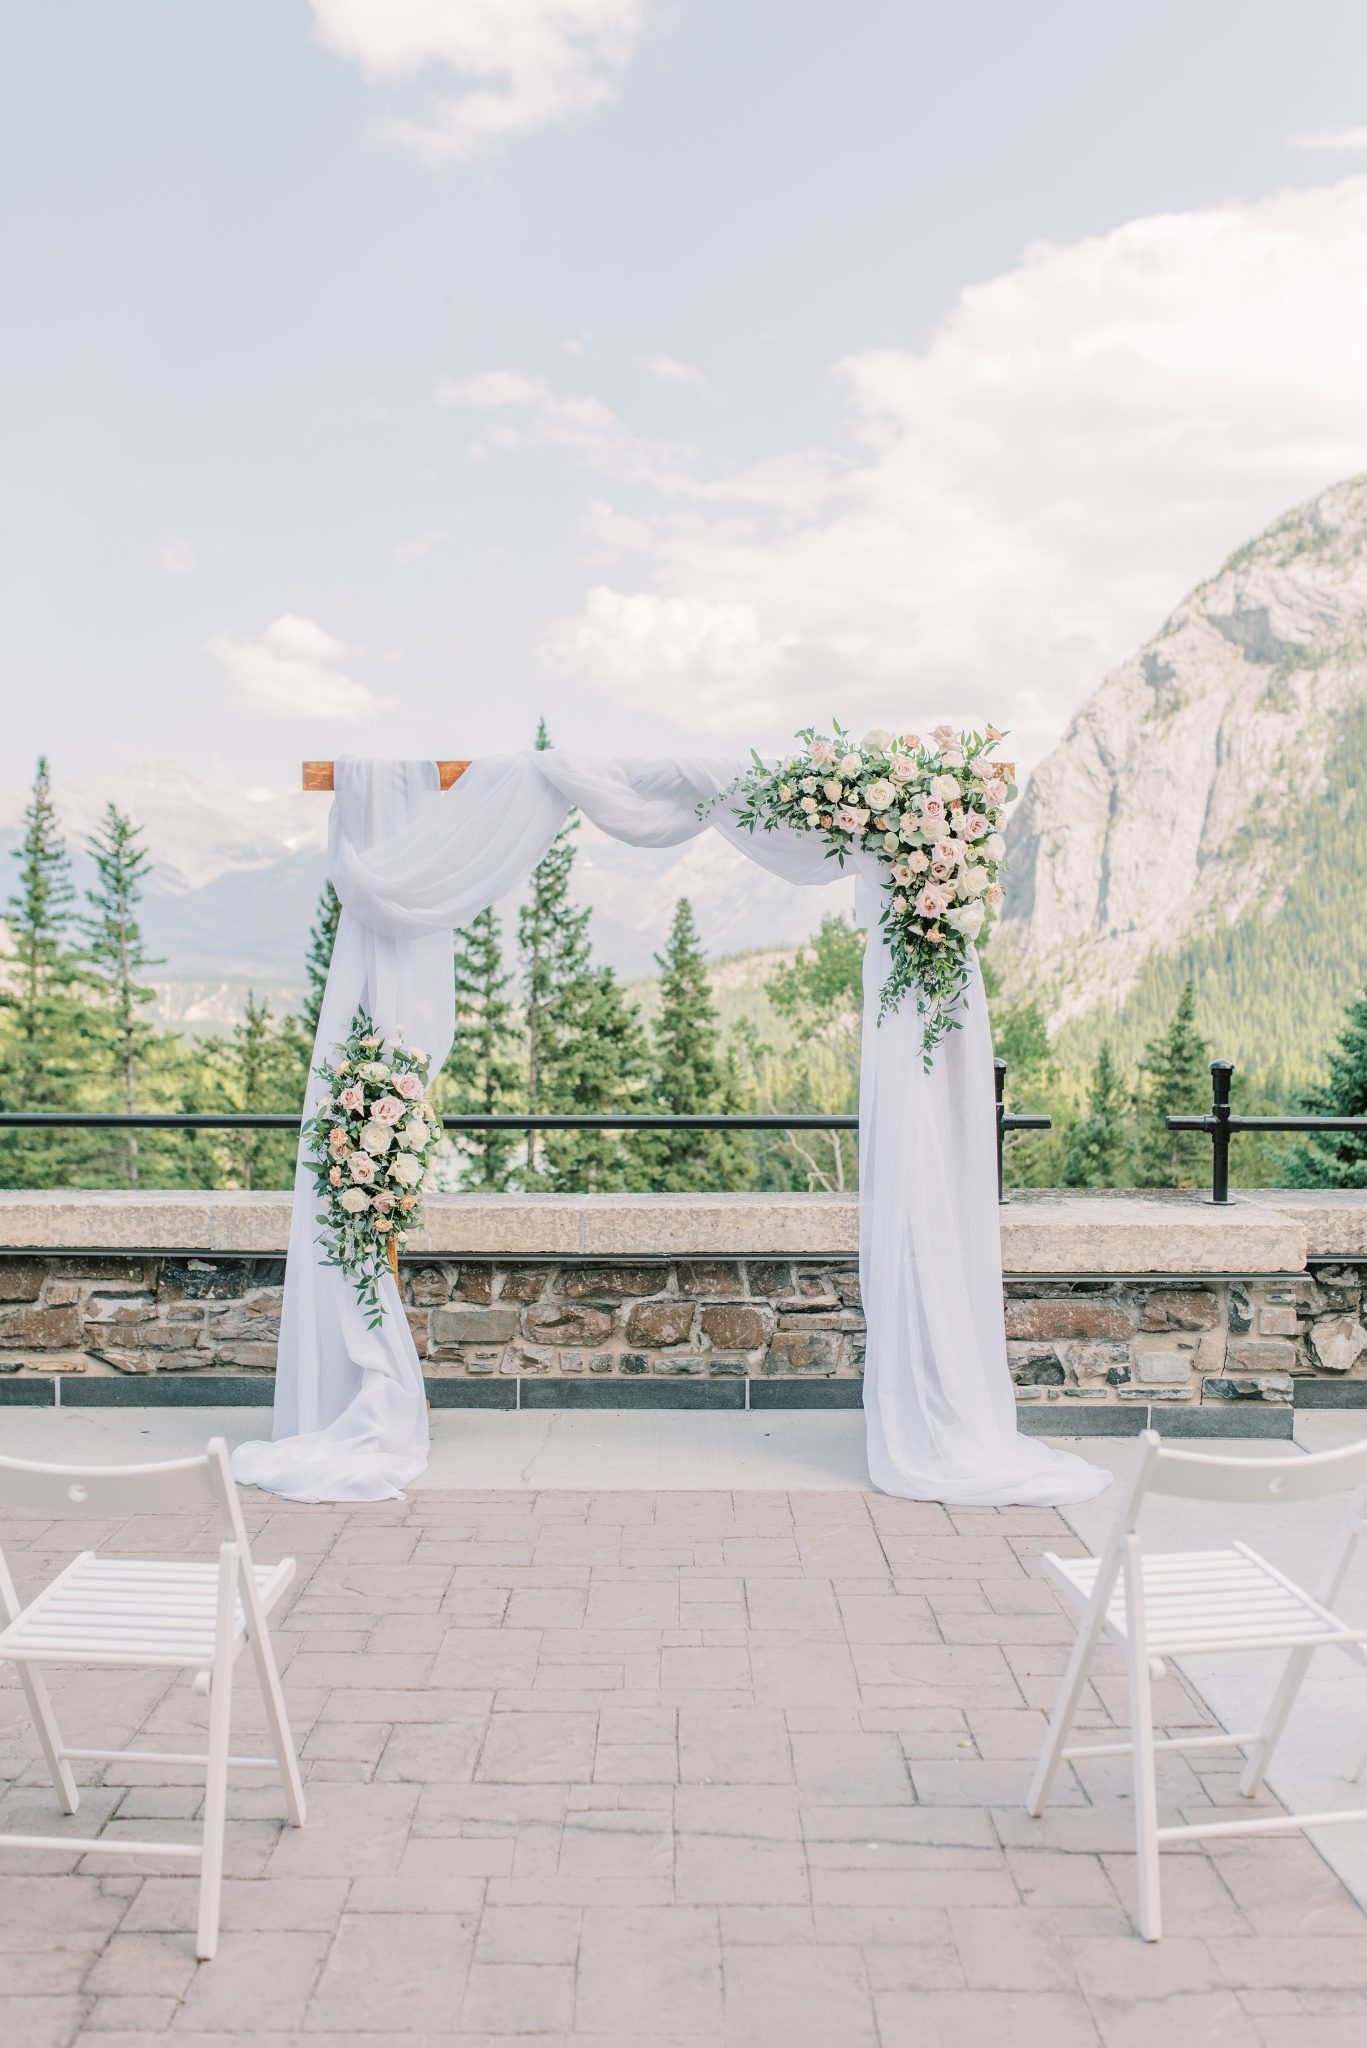 Traditional wedding ceremony arch adorned with pink and white roses at the Fairmont Banff Springs Hotel